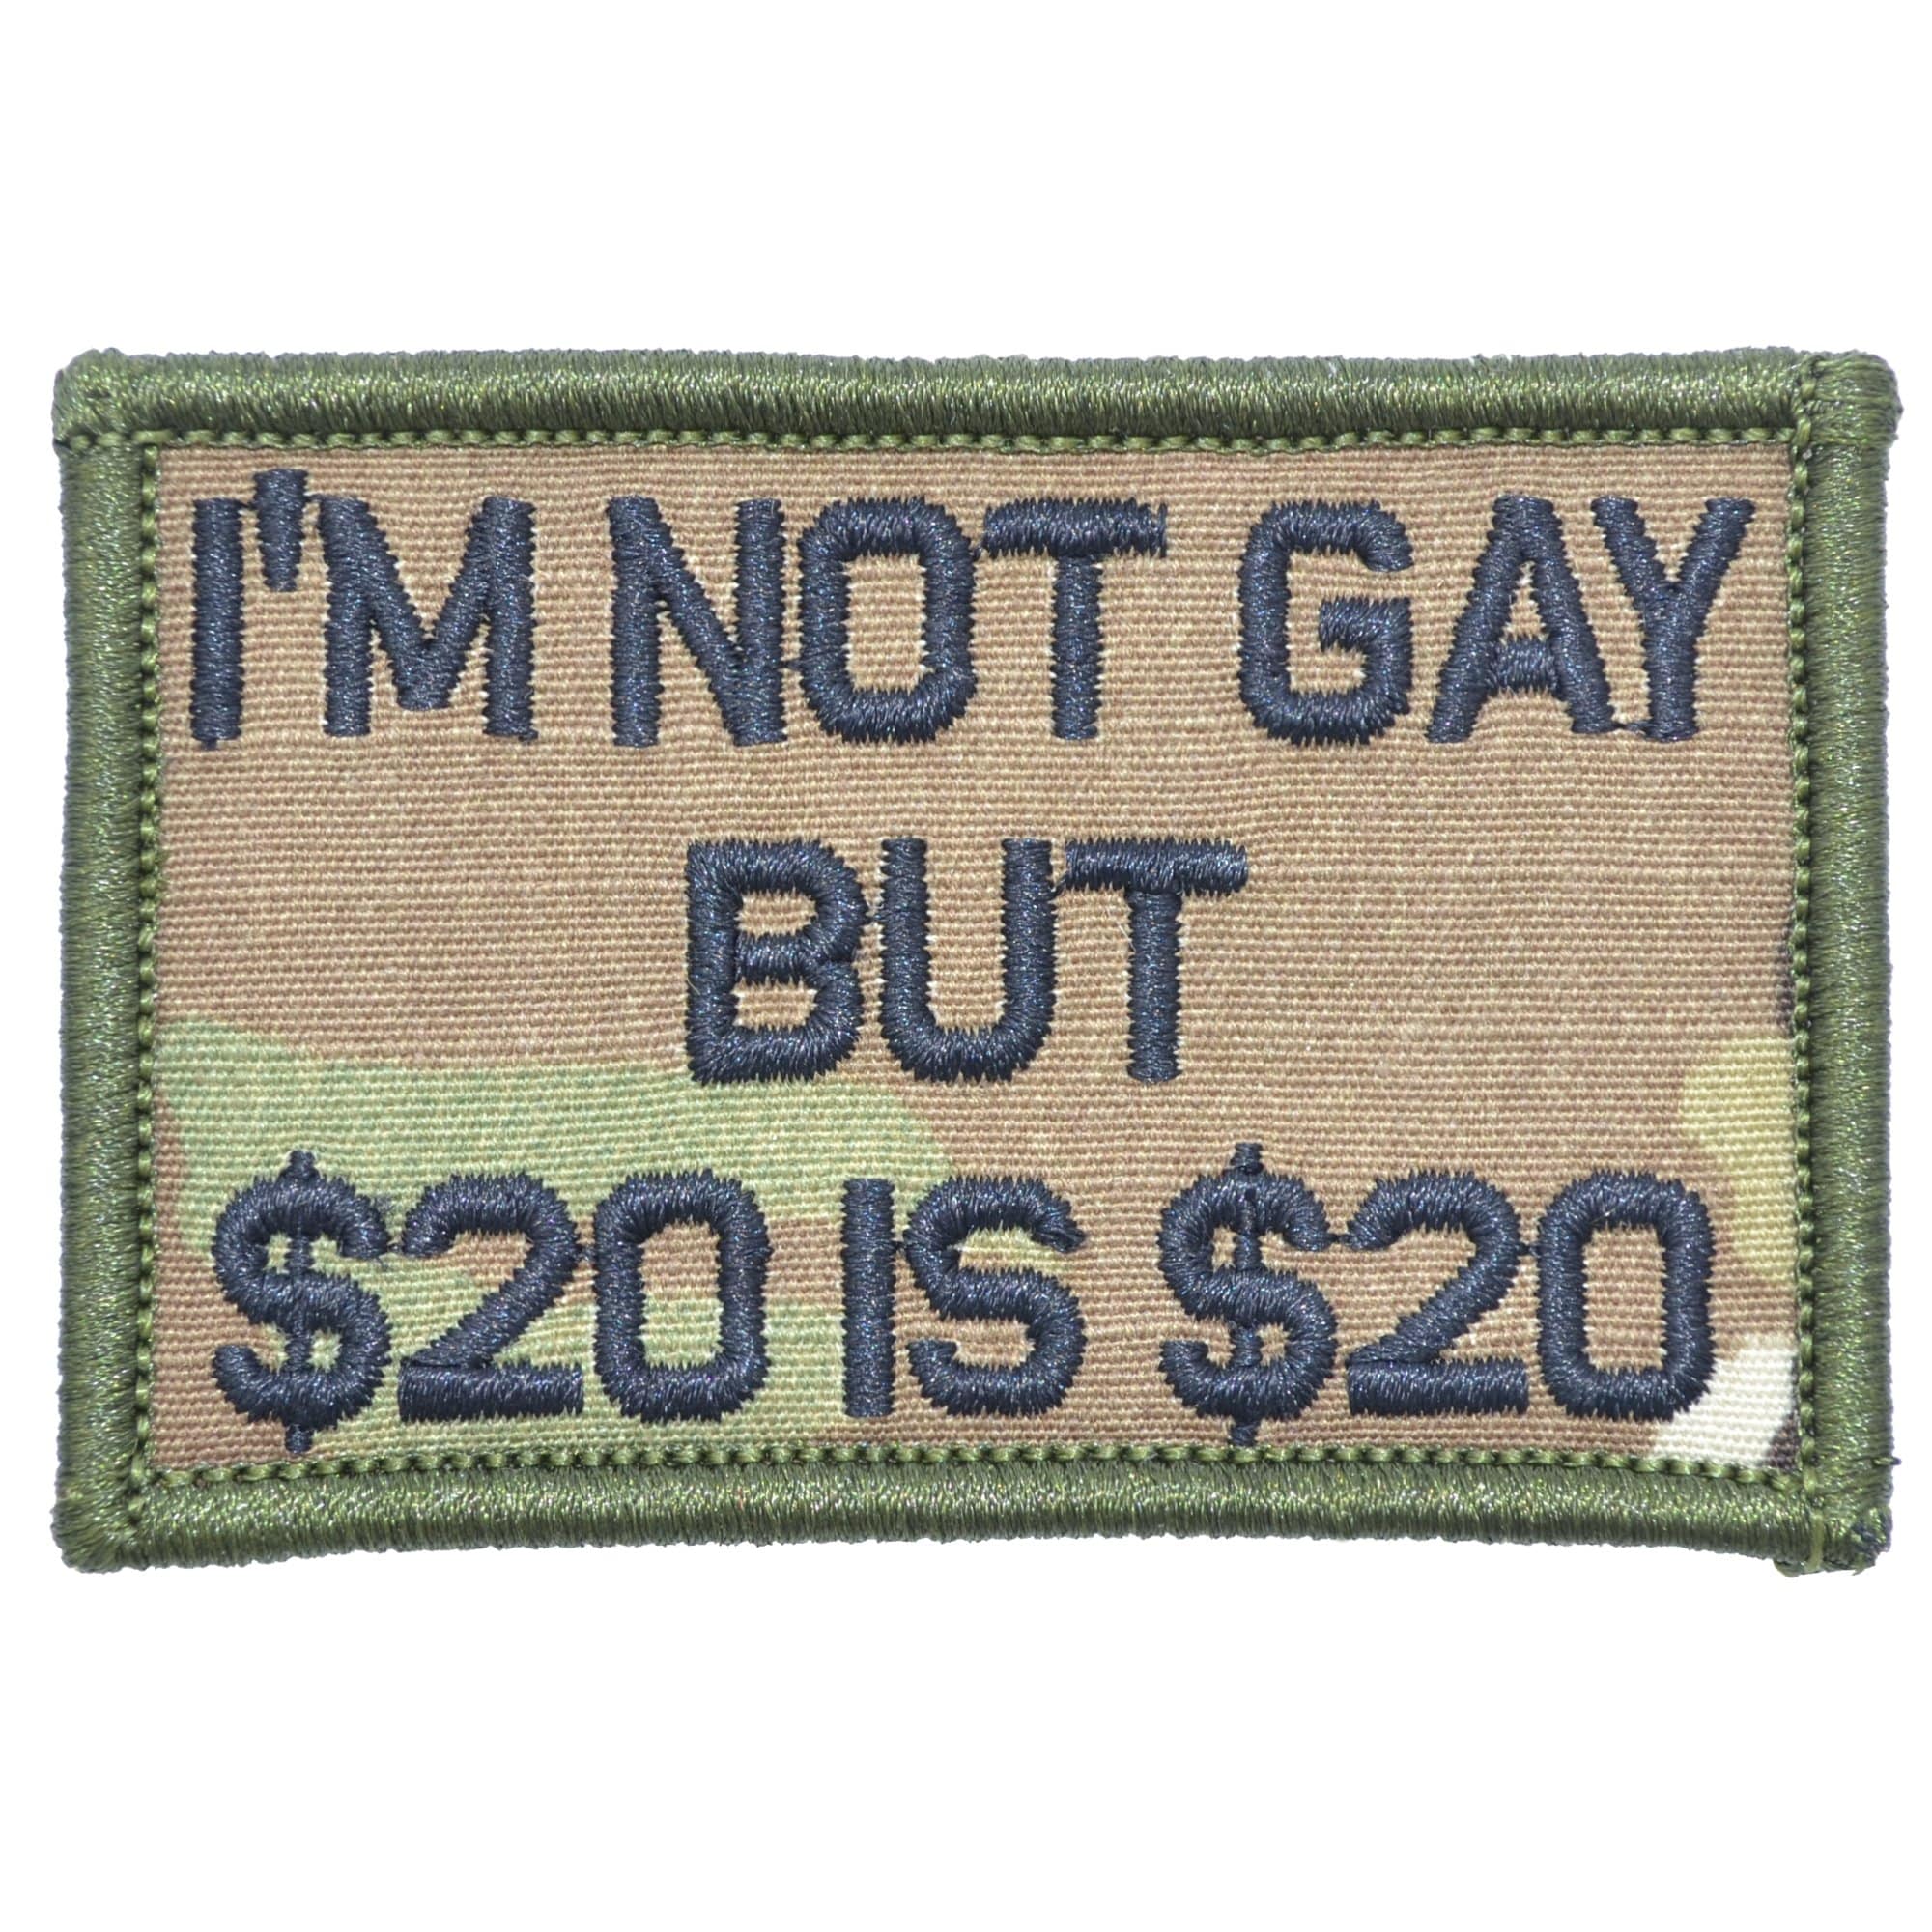 Tactical Gear Junkie Patches MultiCam I'm Not Gay But $20 is $20 - 2x3 Patch